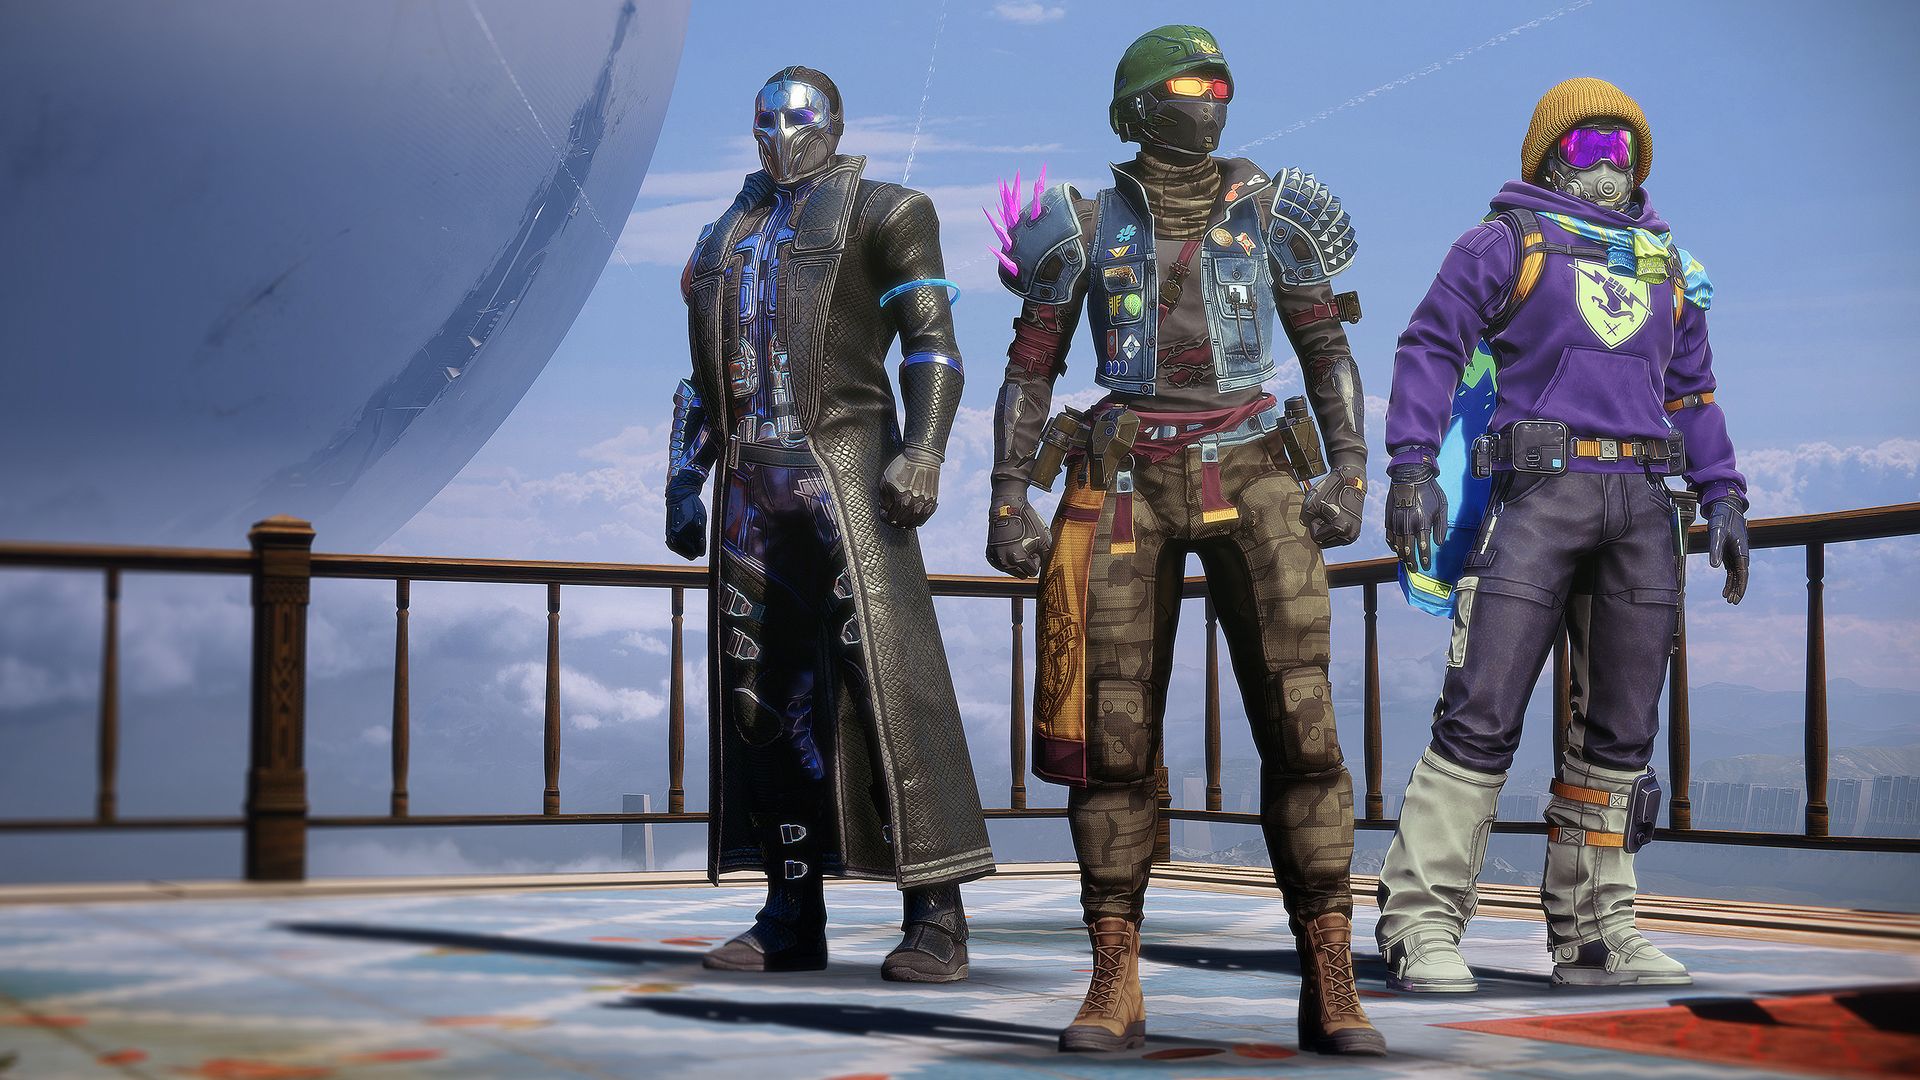 Video game screenshot of three humanoid characters standing on a deck. The middle figure wears a green helmet that resembles that of Halo hero Master Chief